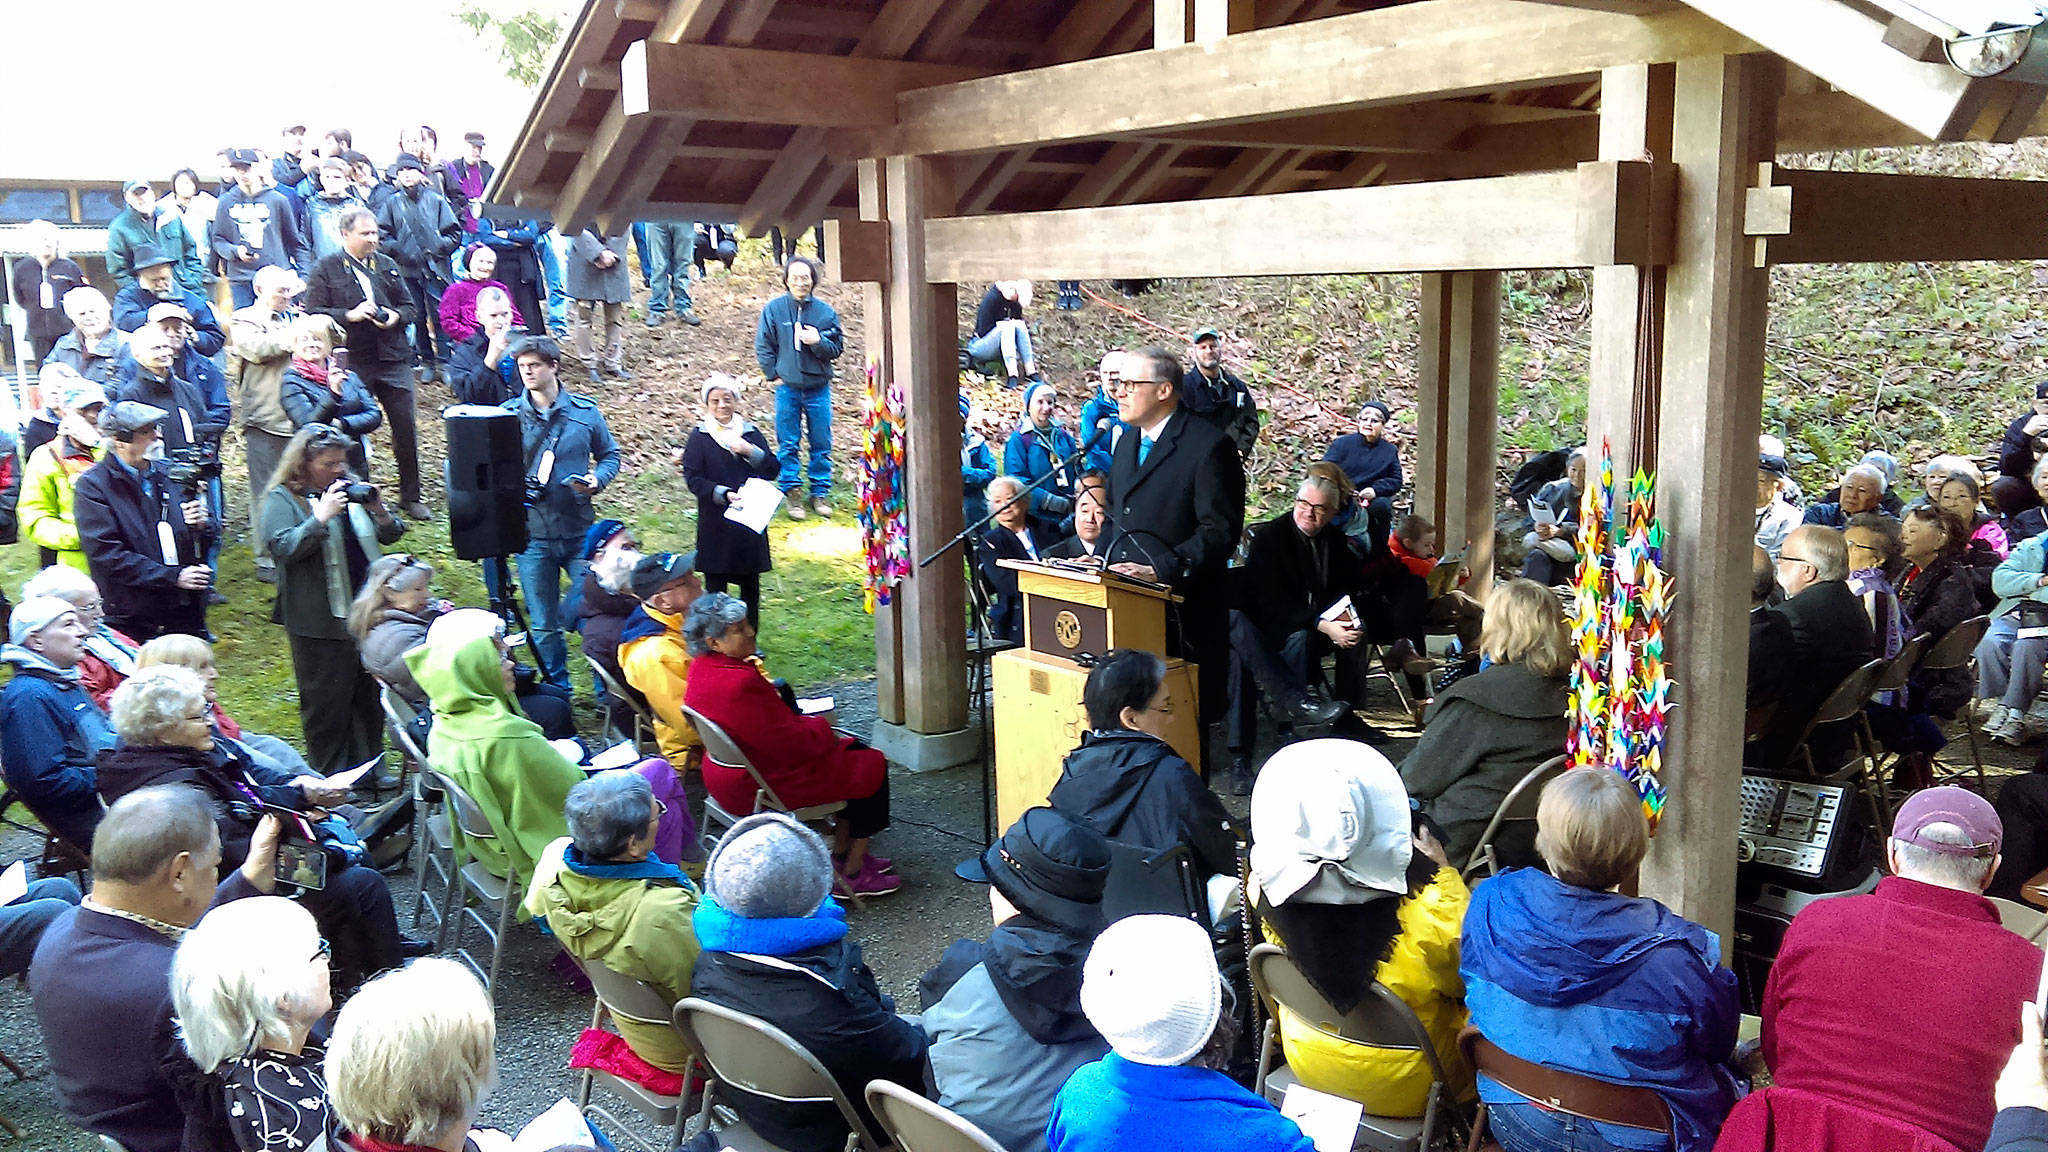 Luciano Marano | Bainbridge Island Review - Washington Governor Jay Inslee speaks to the gathered crowd at the recent 75th annual internment commemoration ceremony at the Bainbridge Island Japanese American Exclusion Memorial.